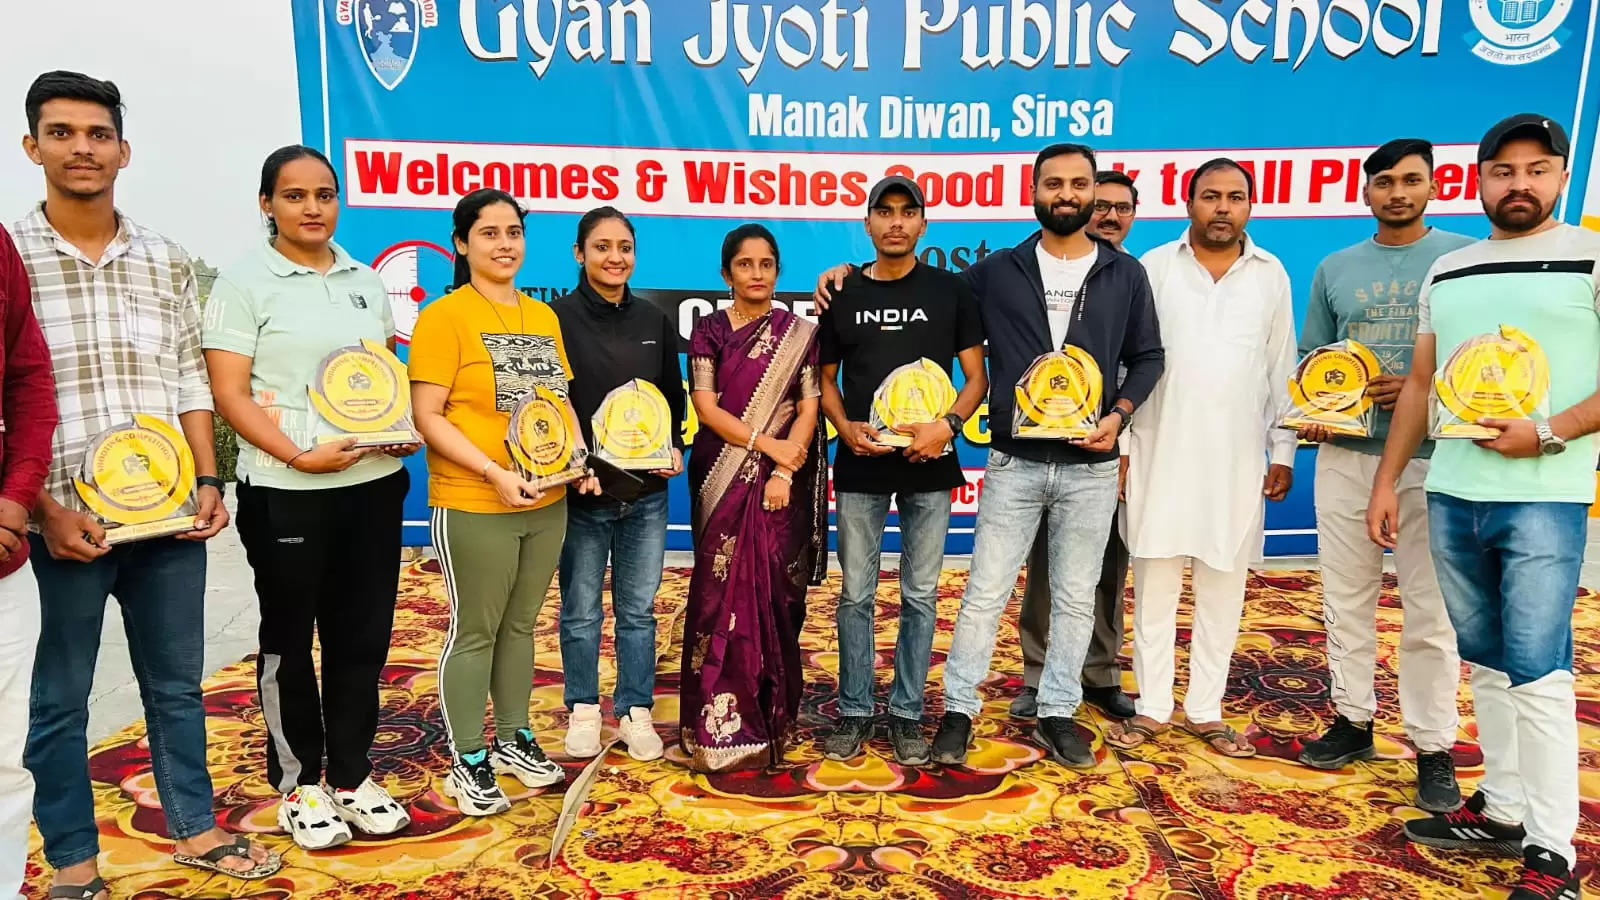 Three day CBSE North Zone Shooting Competition concluded at Gyan Jyoti School of Manak Diwan in Sirsa